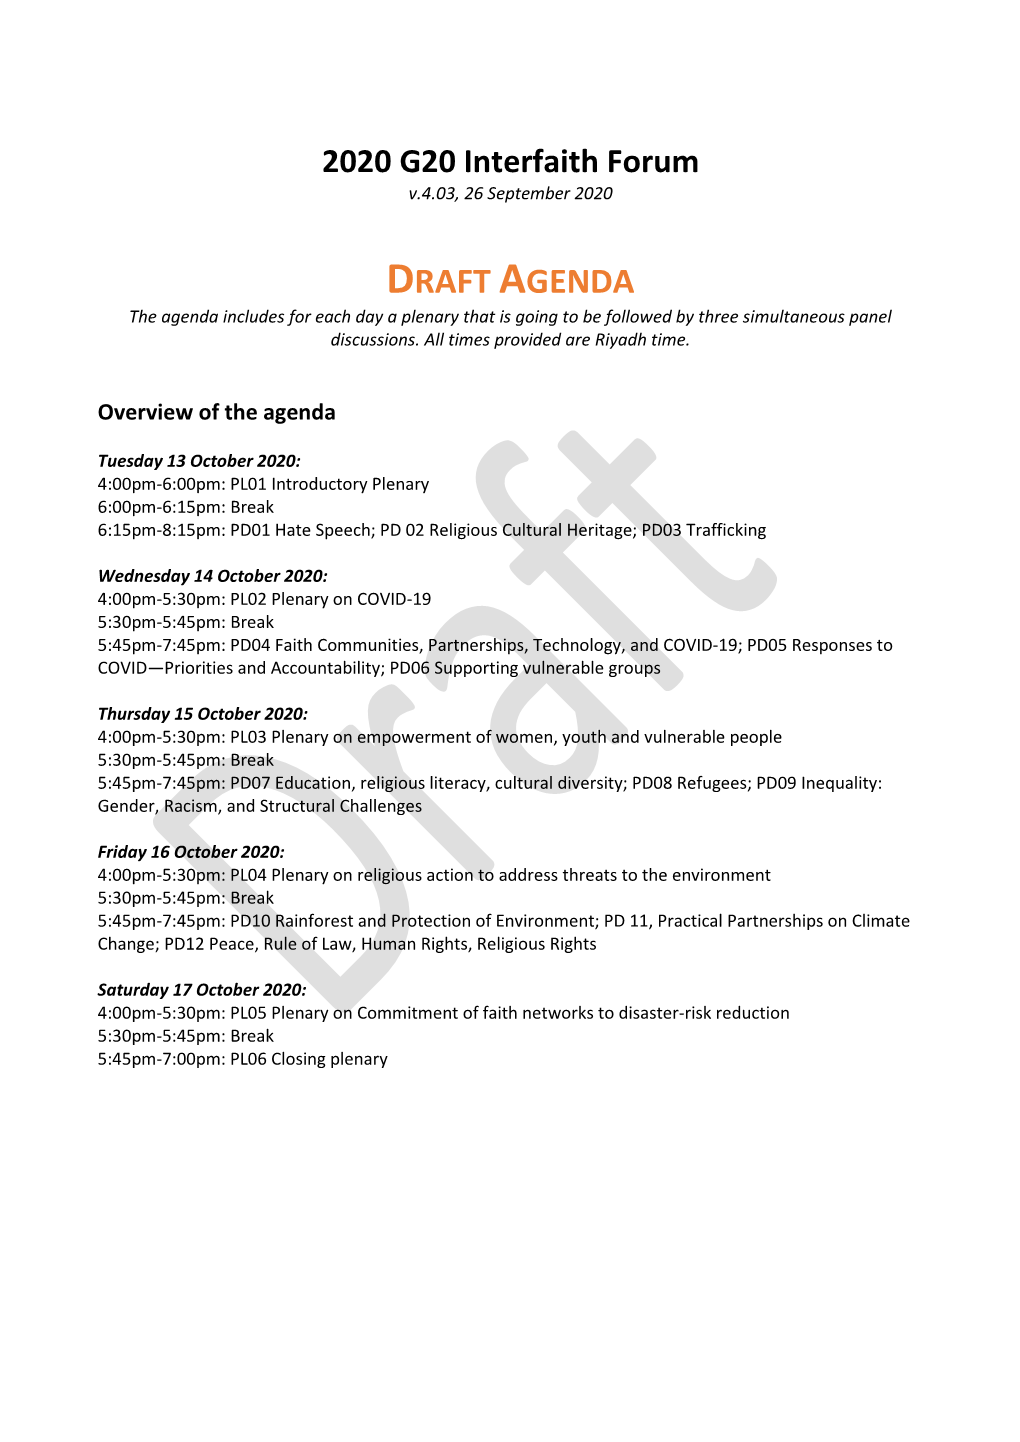 DRAFT AGENDA the Agenda Includes for Each Day a Plenary That Is Going to Be Followed by Three Simultaneous Panel Discussions